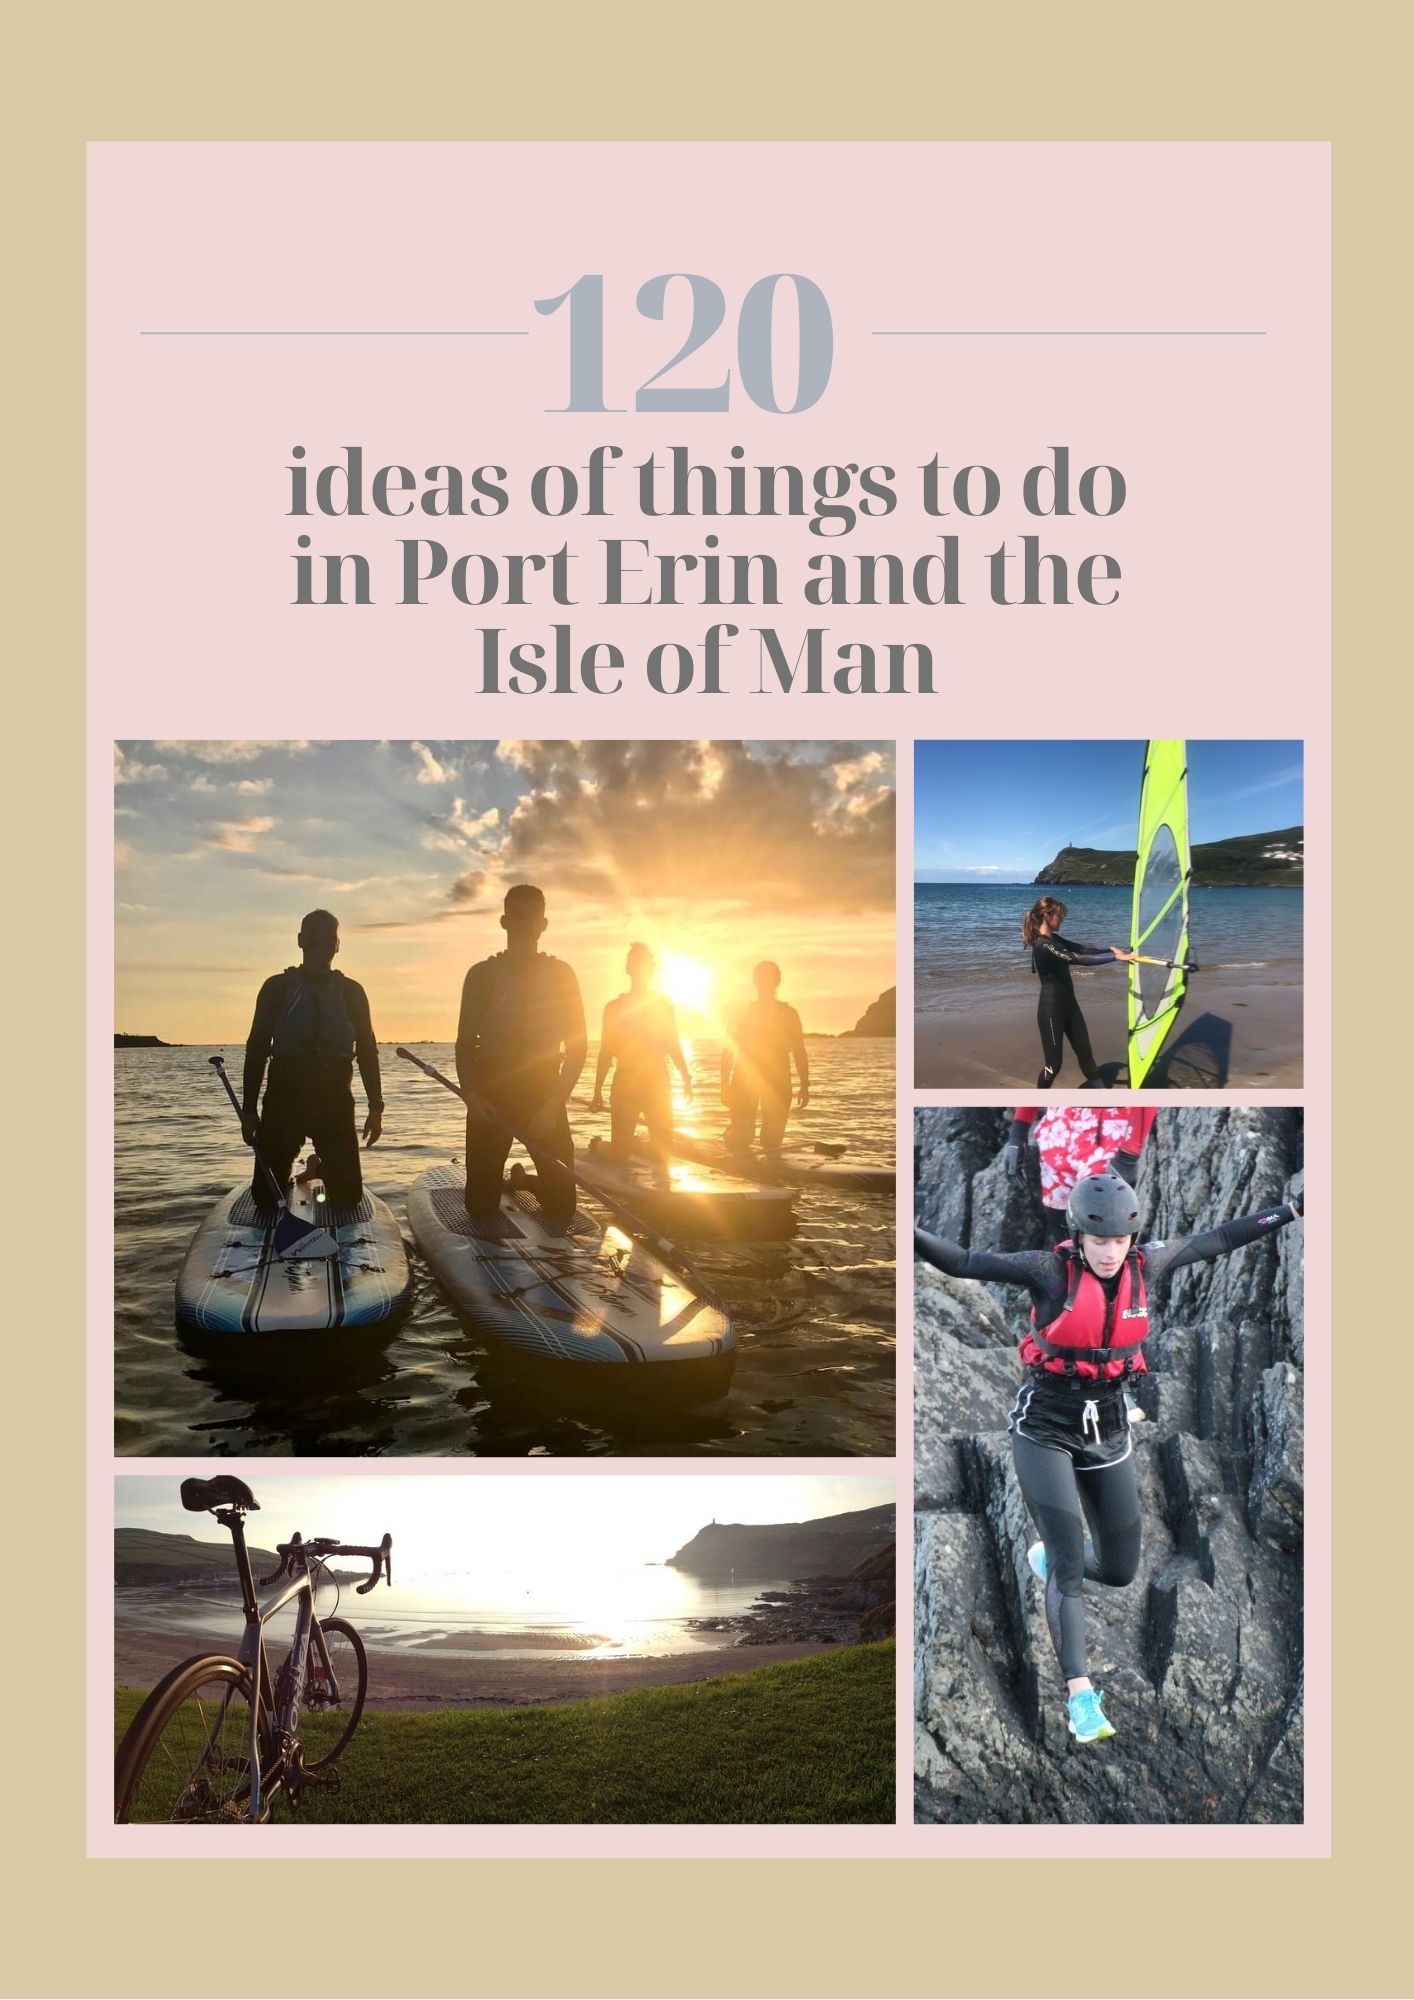 120 activities in the Isle of Man